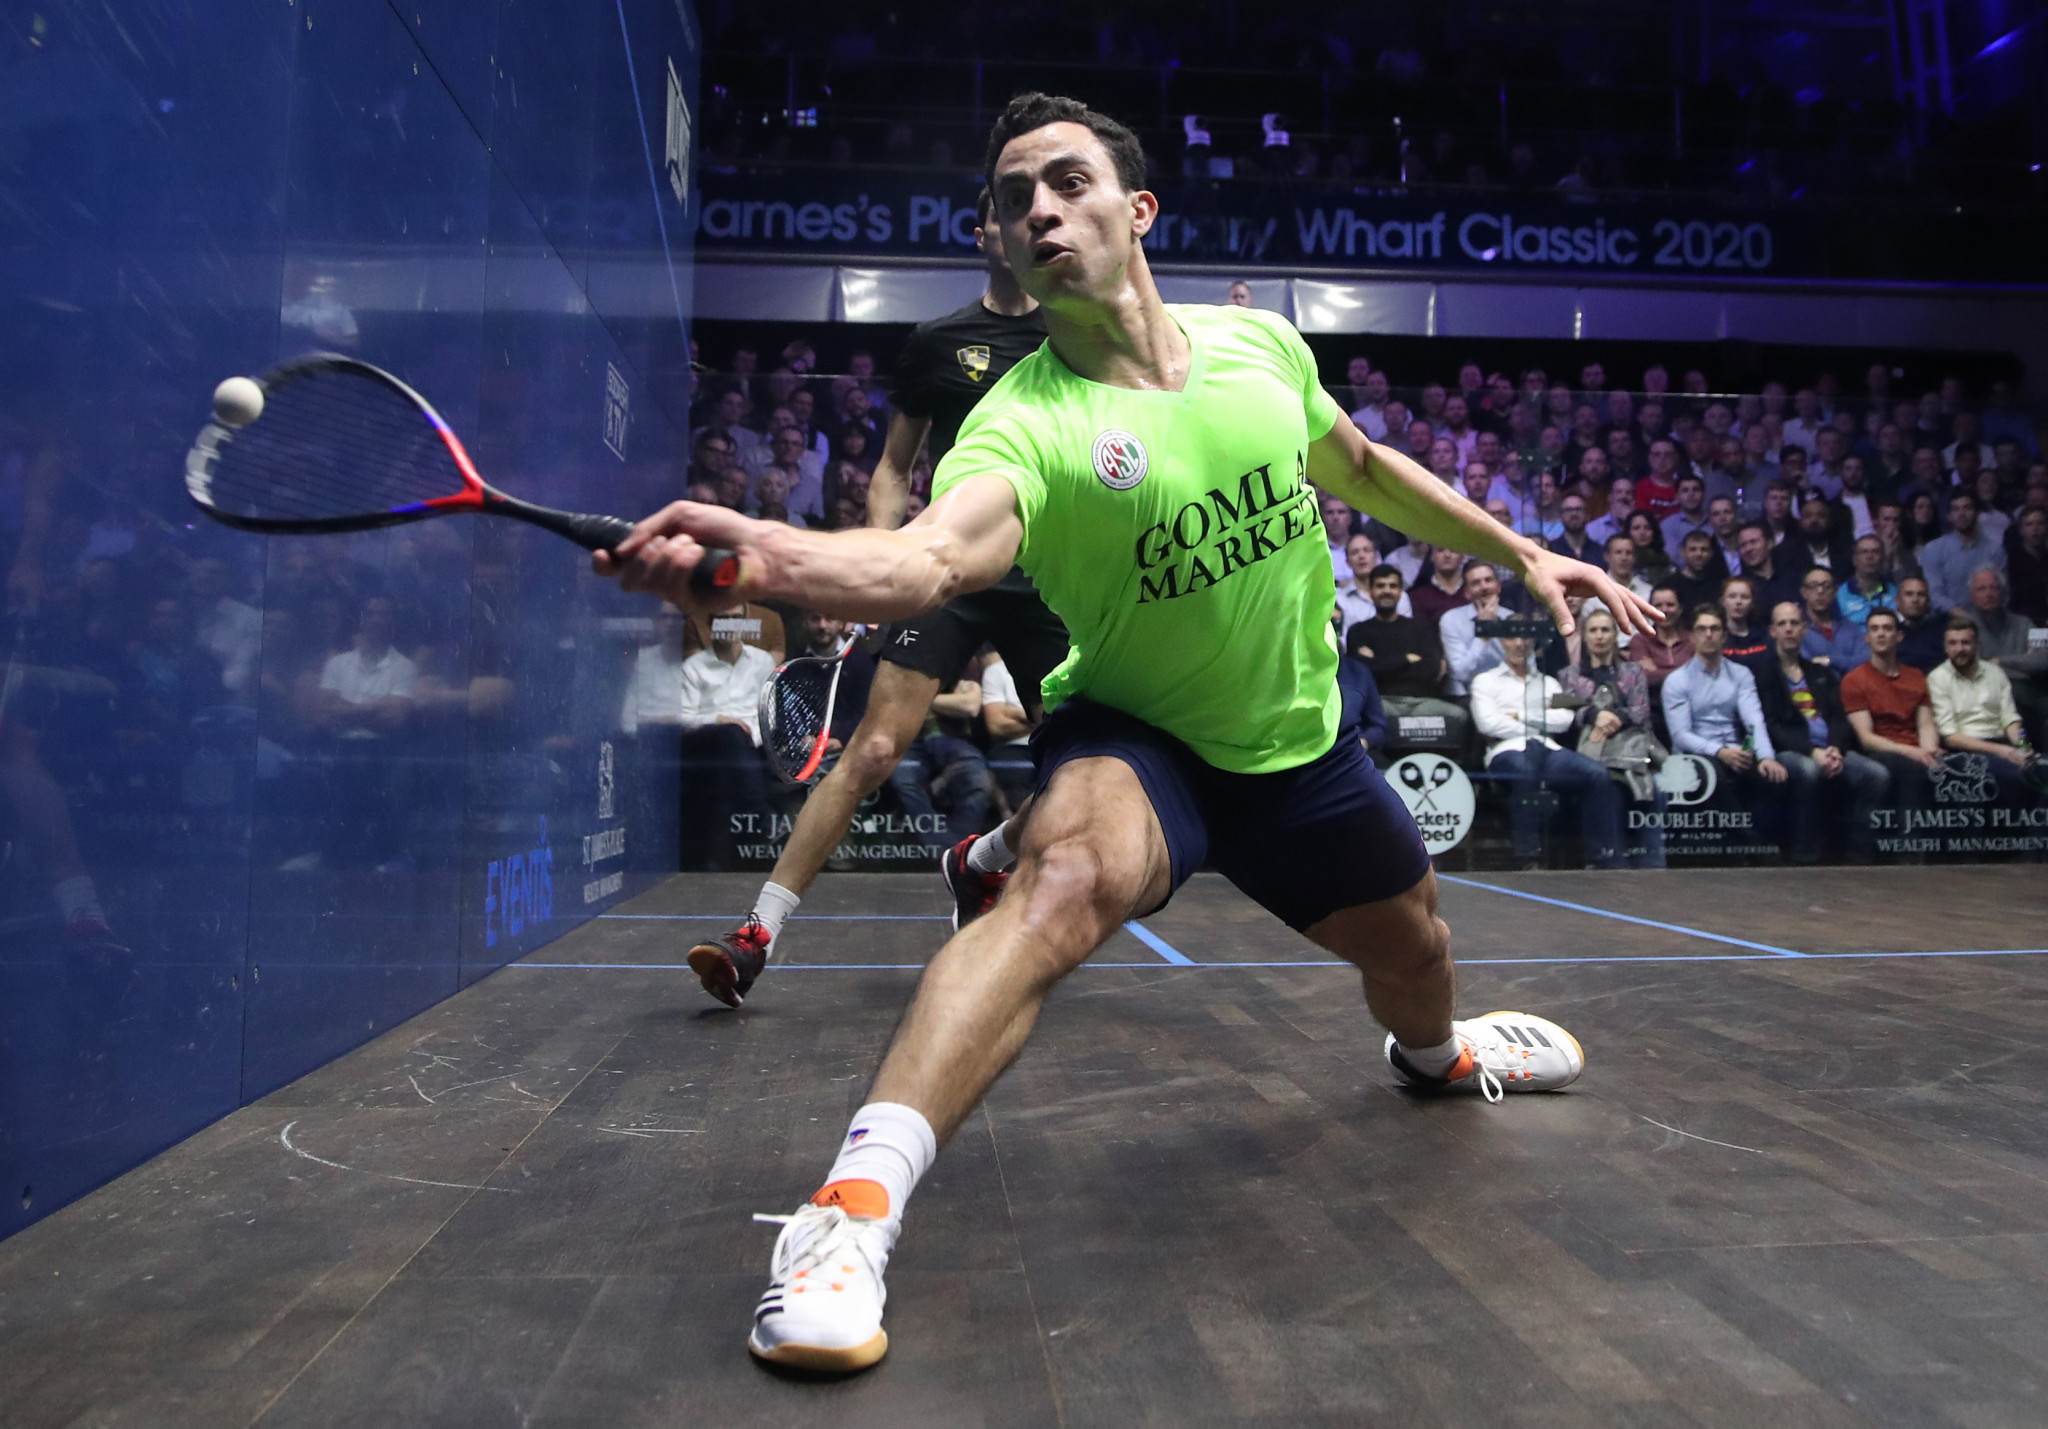 Dessouky back into PSA world rankings top 10 after Black Ball Open victory